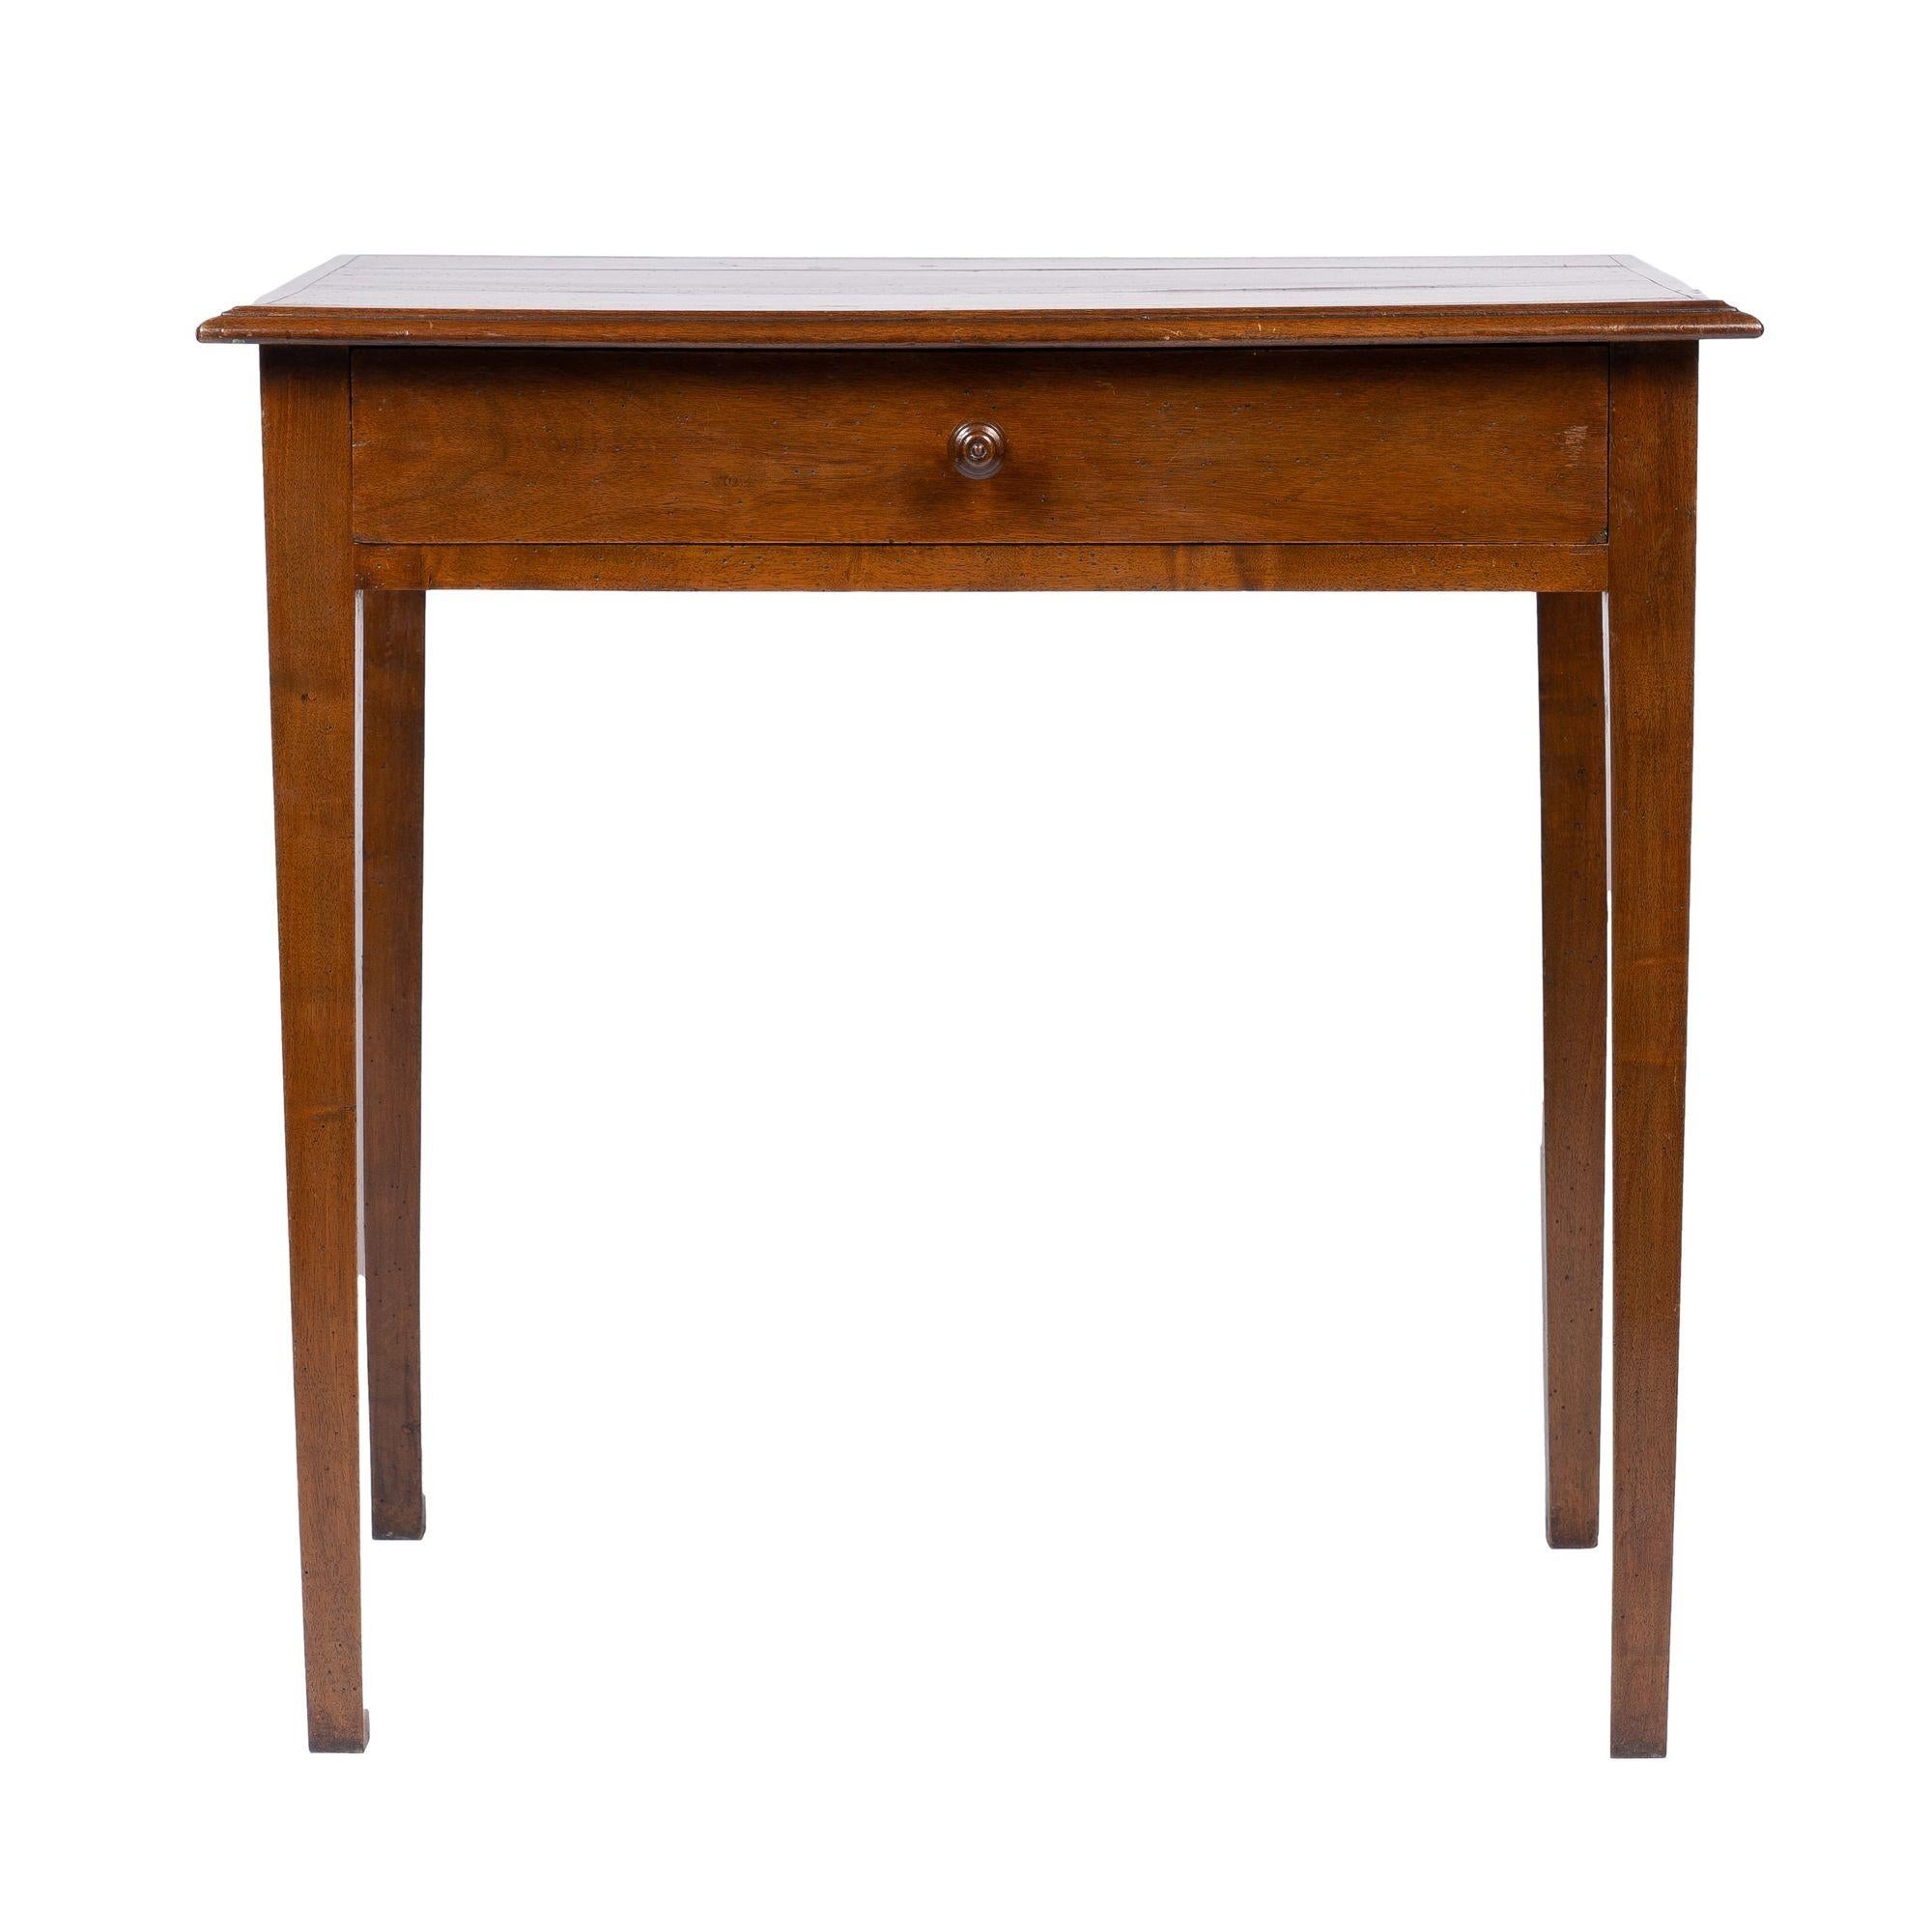 French walnut table on square tapered legs with a two board rectangular top framed by an applied ogee molding. The top is fitted onto a conforming apron with a wide shallow drawer.
France, early 1800’s.